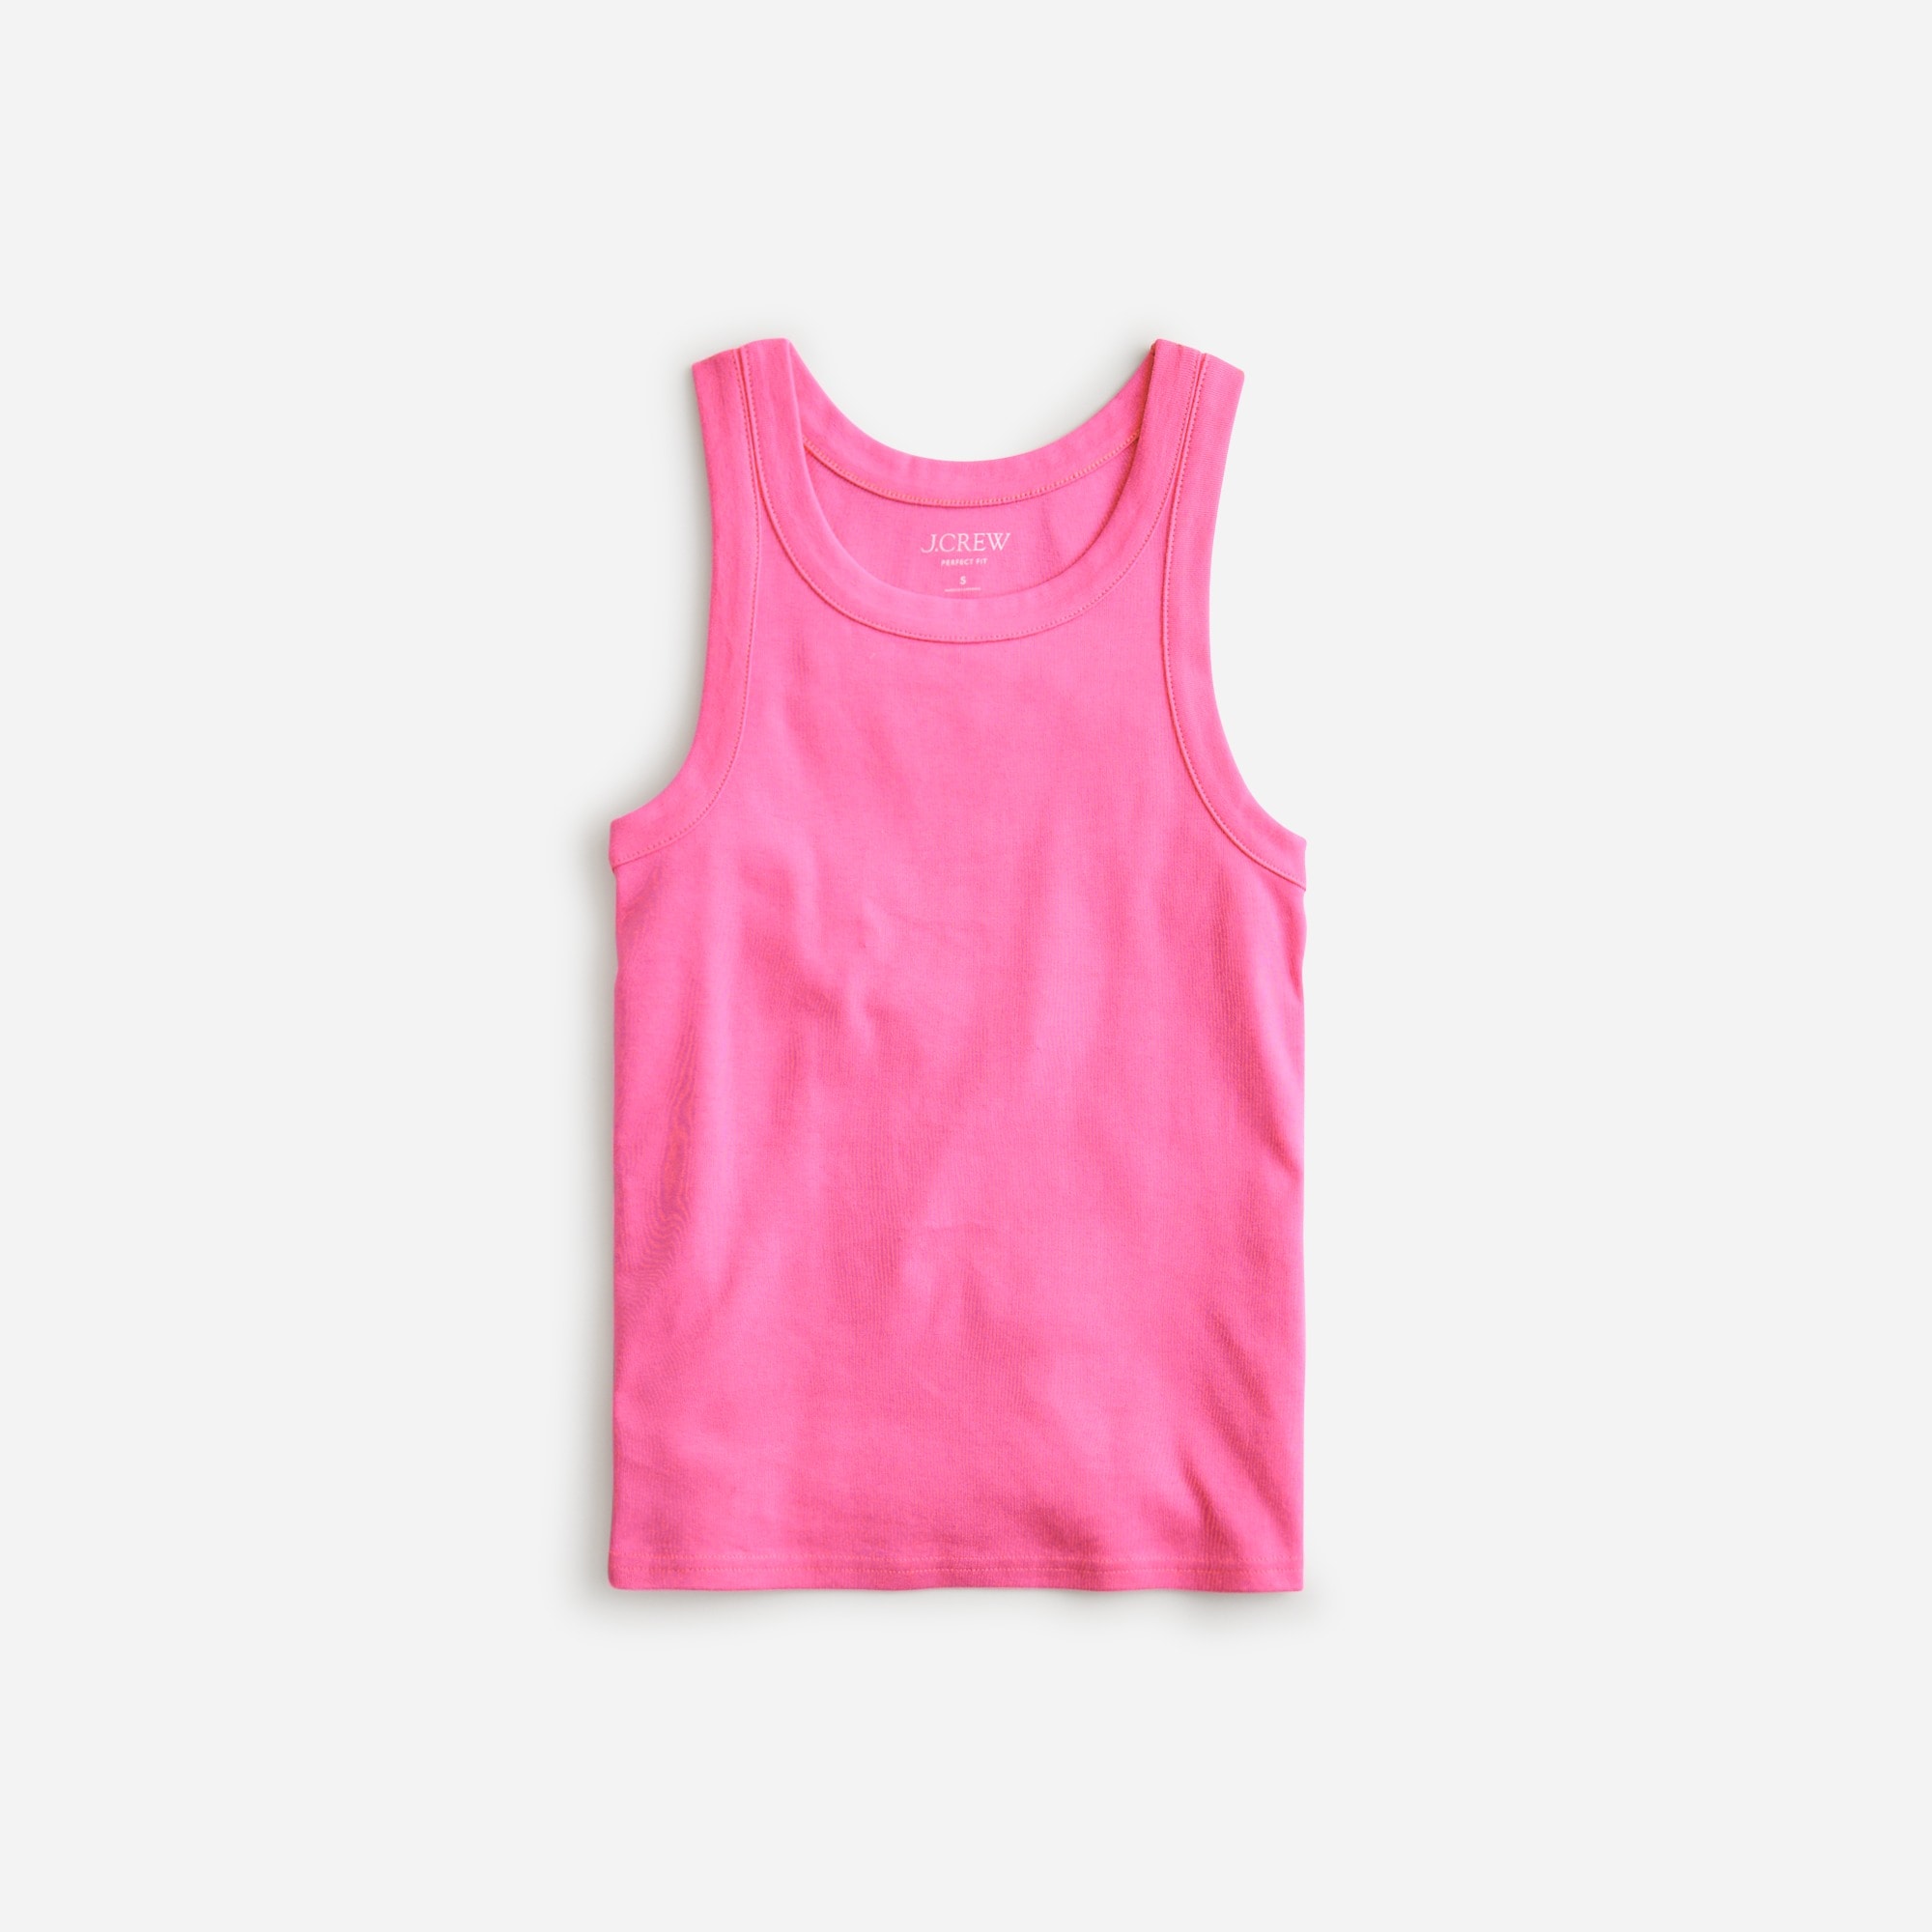  Perfect-fit high-neck tank